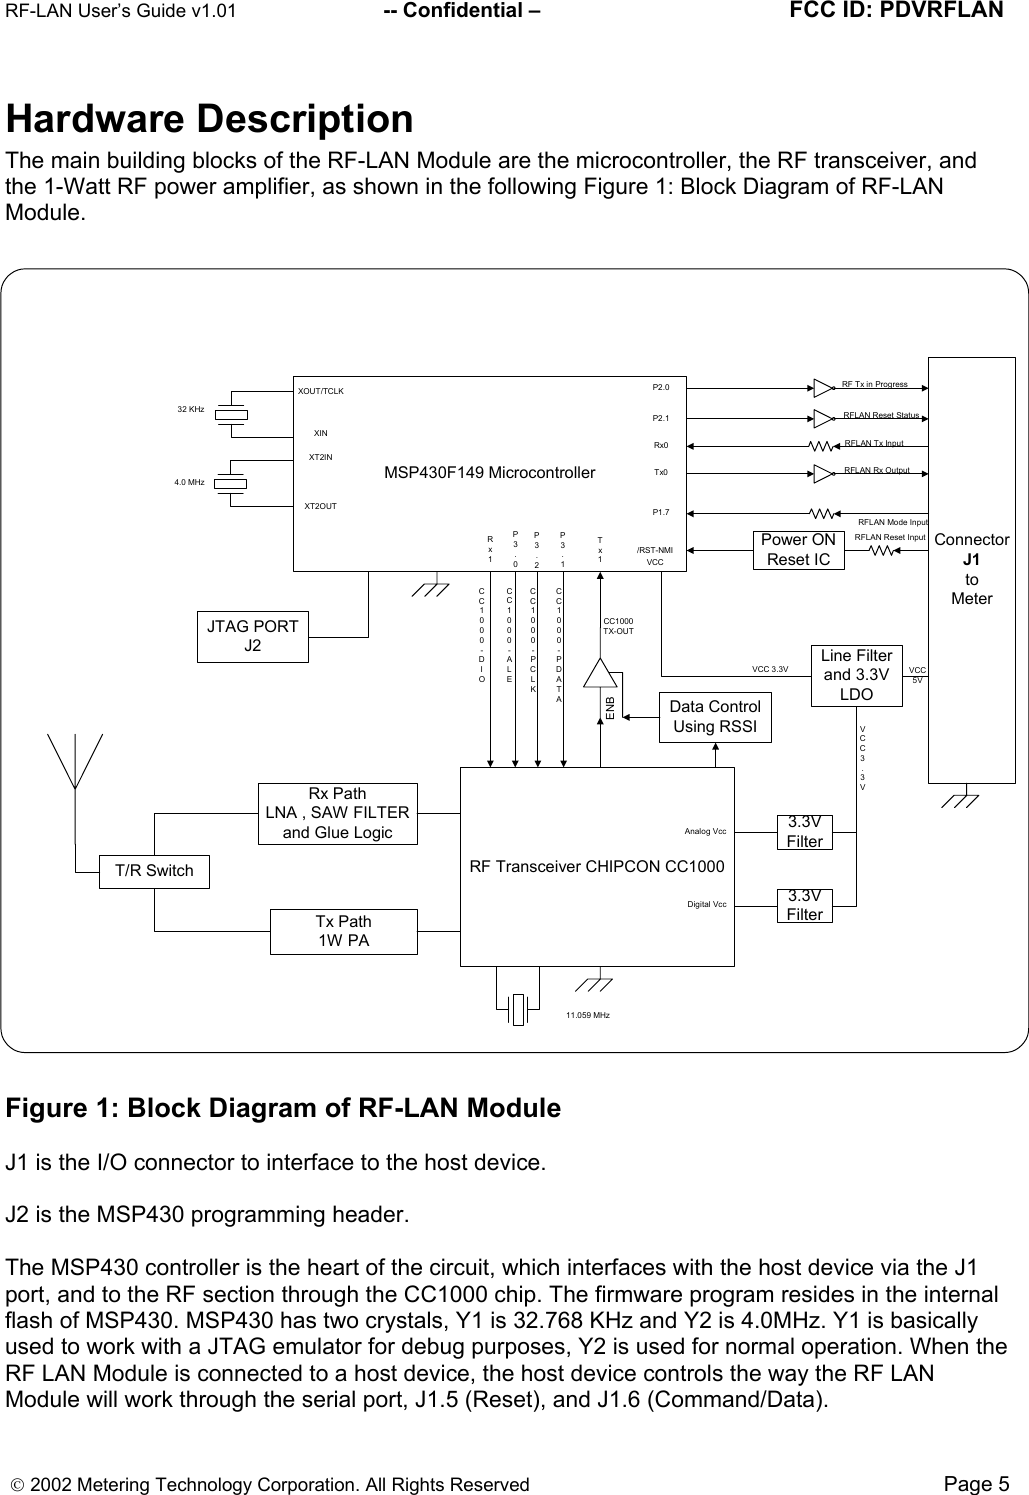 RF-LAN User’s Guide v1.01                        -- Confidential –                                       FCC ID: PDVRFLAN      2002 Metering Technology Corporation. All Rights Reserved                                                                               Page 5 Hardware Description The main building blocks of the RF-LAN Module are the microcontroller, the RF transceiver, and the 1-Watt RF power amplifier, as shown in the following Figure 1: Block Diagram of RF-LAN Module.   MSP430F149 MicrocontrollerConnectorJ1toMeterRF Transceiver CHIPCON CC1000Tx Path1W PAT/R SwitchRx PathLNA , SAW FILTERand Glue LogicLine Filterand 3.3VLDOData ControlUsing RSSI3.3VFilter3.3VFilterENBRF Tx in ProgressRFLAN Reset StatusRFLAN Tx InputRFLAN Rx OutputRFLAN Reset InputRFLAN Mode InputVCC5VVCC3.3VAnalog VccDigital VccVCC 3.3VCC1000TX-OUTCC1000-ALECC1000-PCLKCC1000-PDATA32 KHz11.059 MHzBlock Diagram Of Mesa Verde Project4.0 MHzPower ONReset ICP3.0Rx1P3.2P3.1CC1000-DIOTx1P2.0P2.1Rx0Tx0P1.7/RST-NMIXOUT/TCLKXINXT2INXT2OUTJTAG PORTJ2VCC Figure 1: Block Diagram of RF-LAN Module   J1 is the I/O connector to interface to the host device.  J2 is the MSP430 programming header.  The MSP430 controller is the heart of the circuit, which interfaces with the host device via the J1 port, and to the RF section through the CC1000 chip. The firmware program resides in the internal flash of MSP430. MSP430 has two crystals, Y1 is 32.768 KHz and Y2 is 4.0MHz. Y1 is basically used to work with a JTAG emulator for debug purposes, Y2 is used for normal operation. When the RF LAN Module is connected to a host device, the host device controls the way the RF LAN Module will work through the serial port, J1.5 (Reset), and J1.6 (Command/Data).   